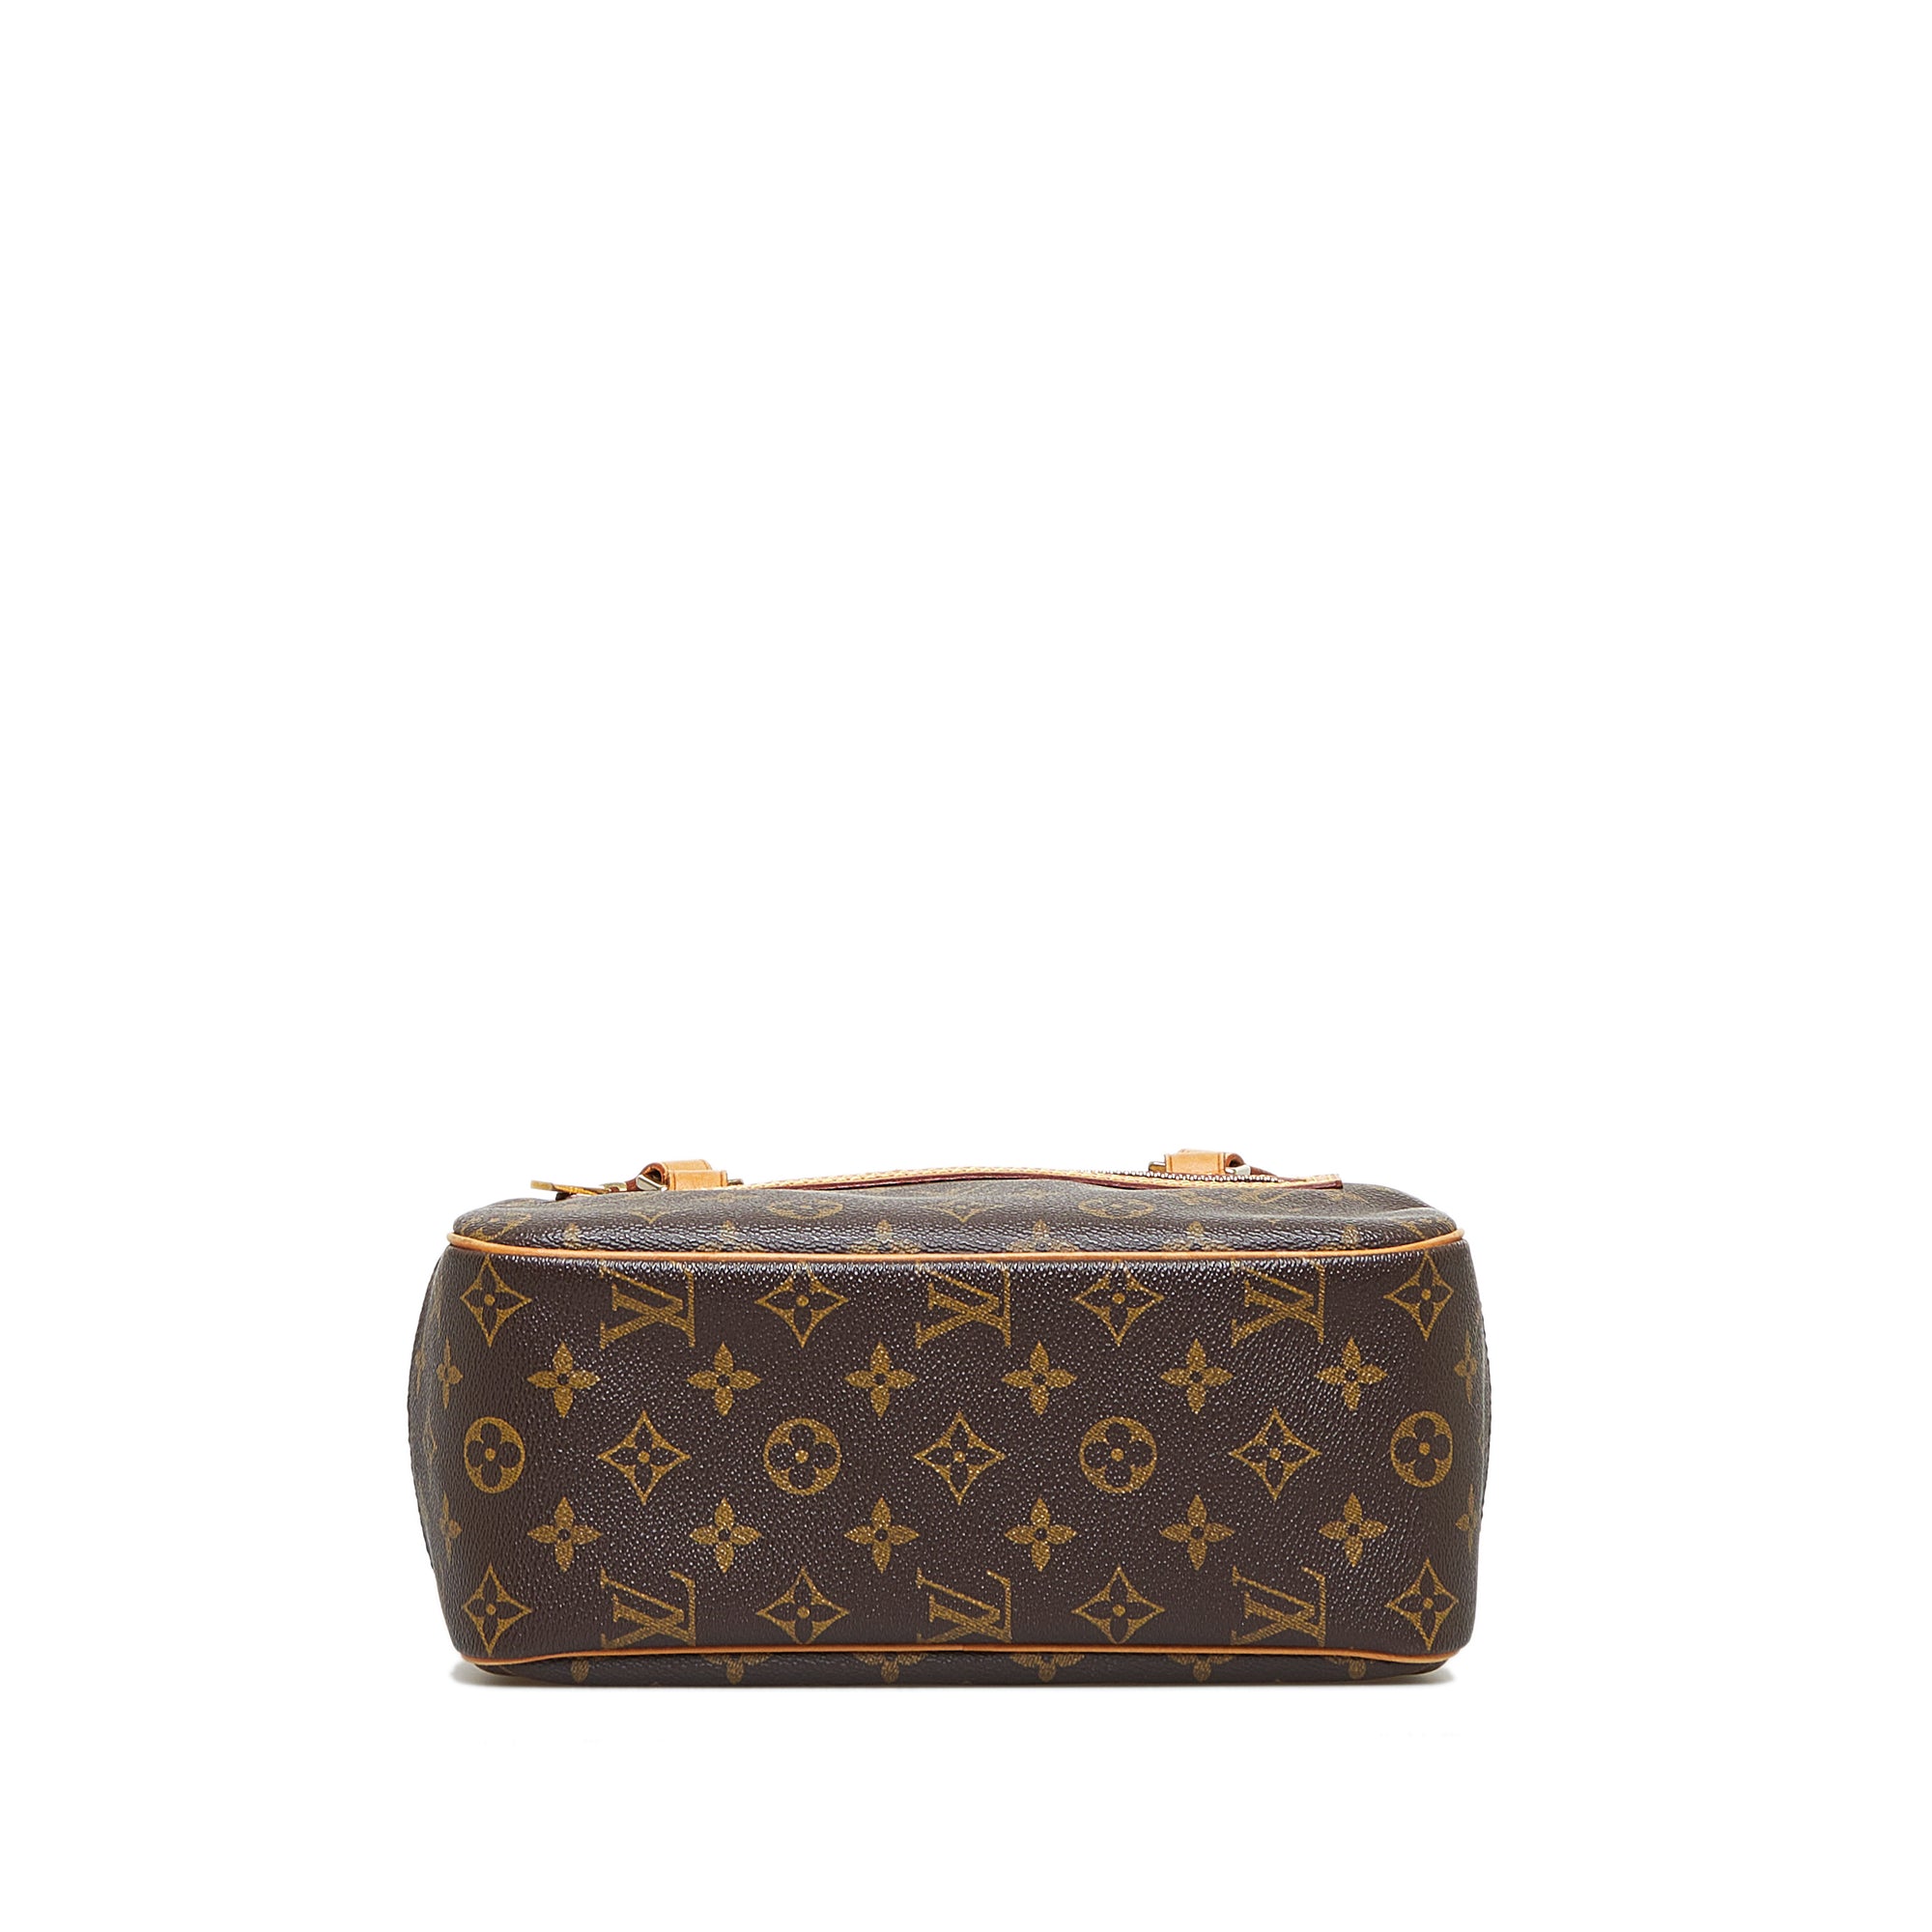 Shop for Louis Vuitton Monogram Canvas Leather Cite MM Shoulder Bag -  Shipped from USA